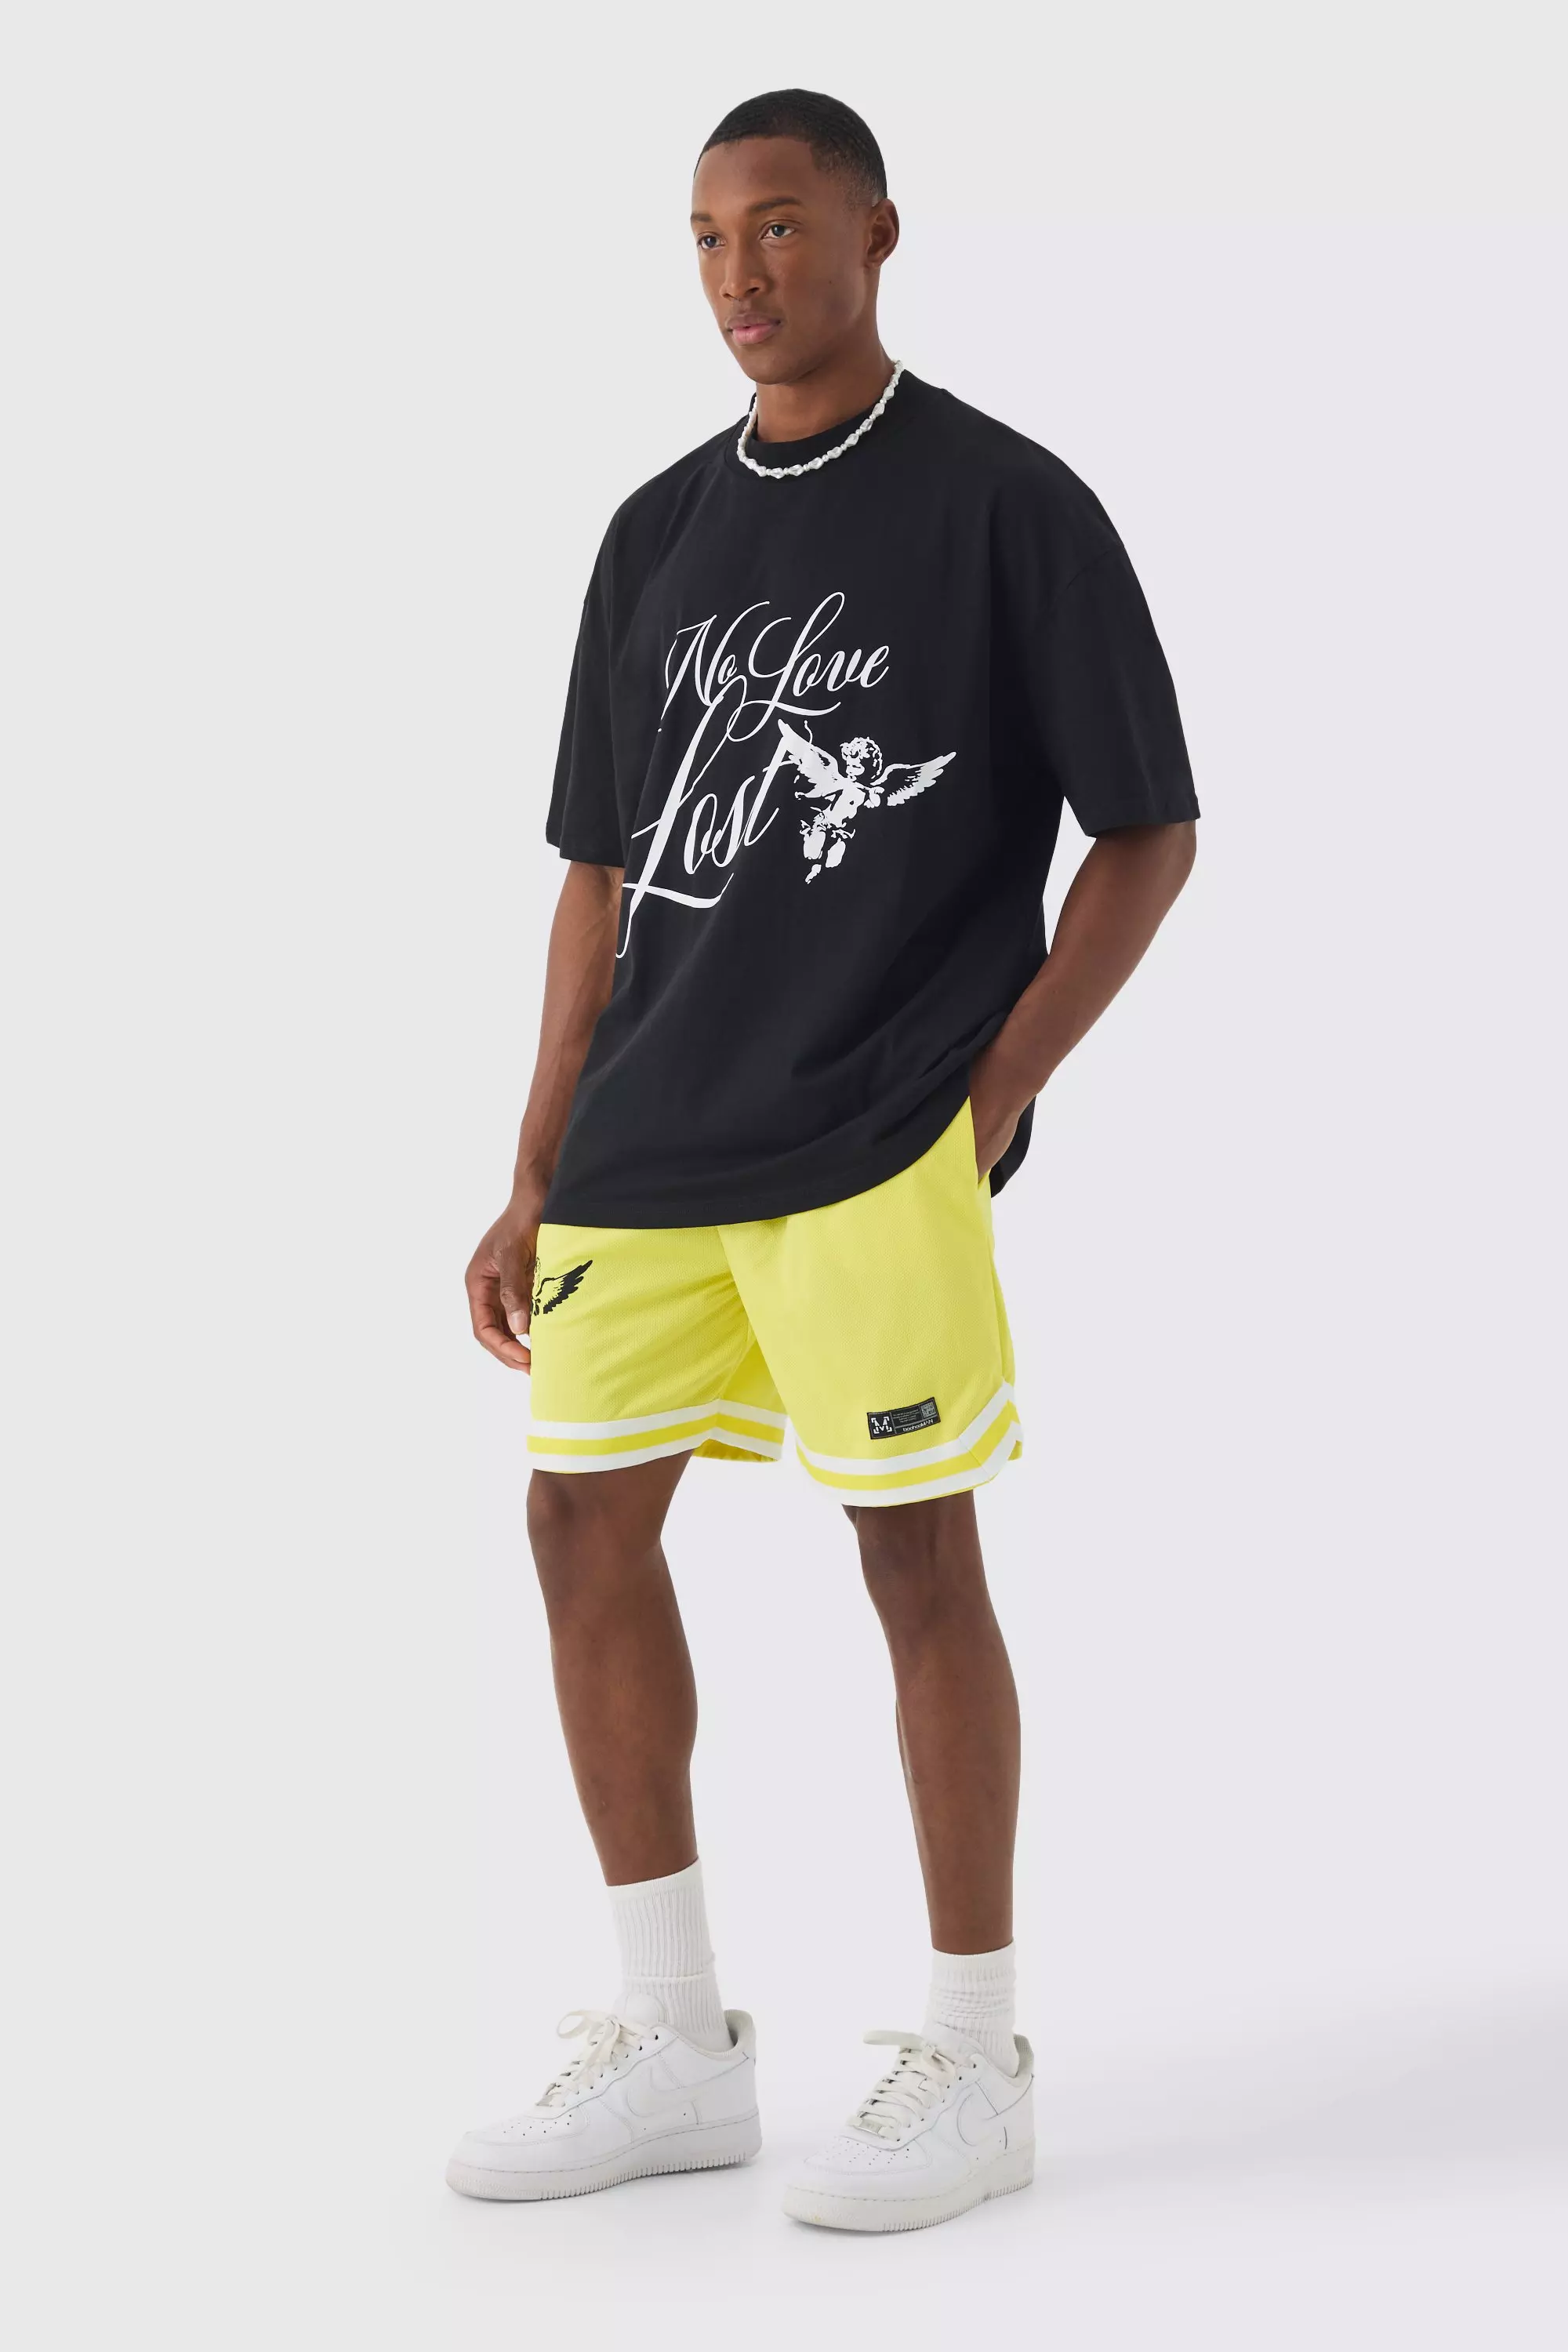 Oversized Extended Neck No Love T-shirt And Mesh Shorts Set Yellow